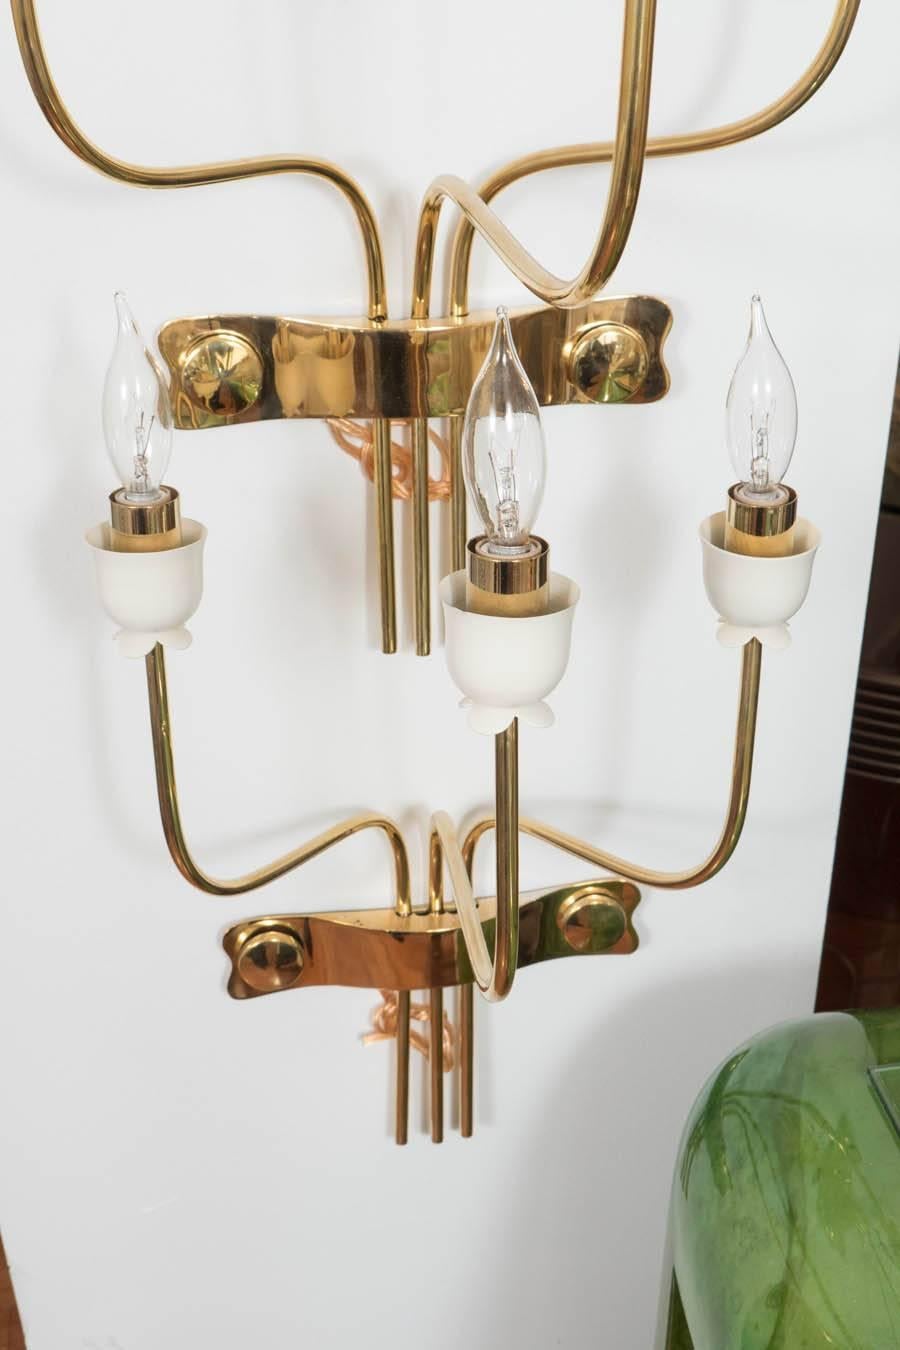 Mid-20th Century Pair of Three-Arm Brass Sconces with Flower Bobeches